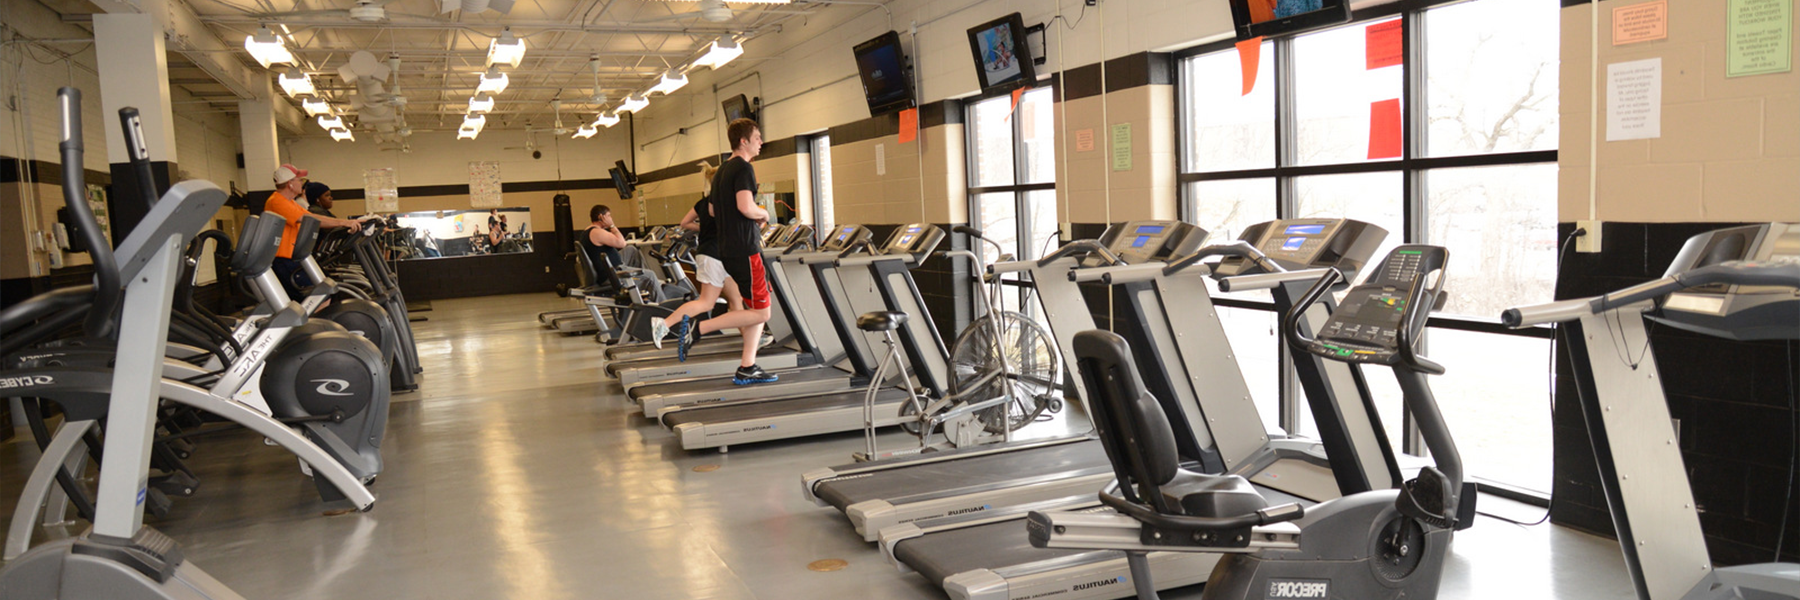 four students on treadmills in the campus gym